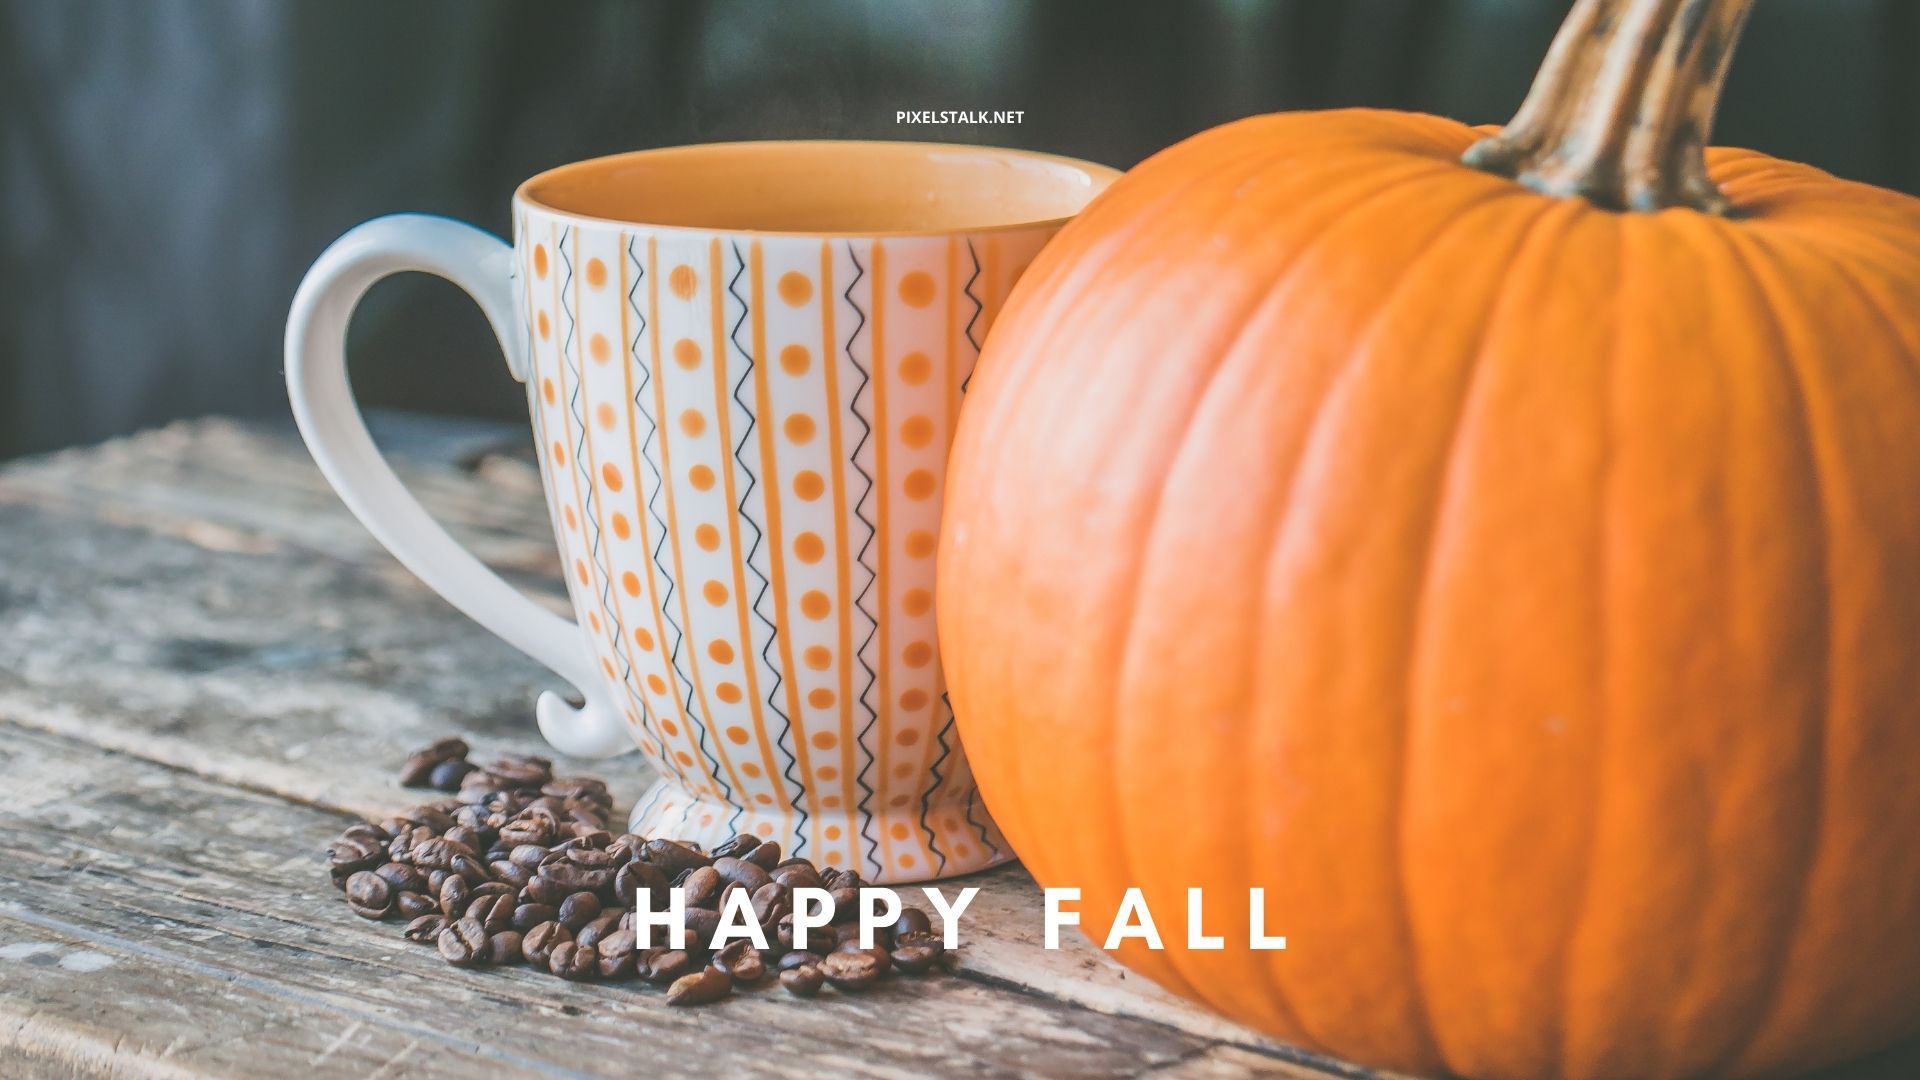 Happy Fall wallpaper with a pumpkin and a cup of coffee - Pumpkin